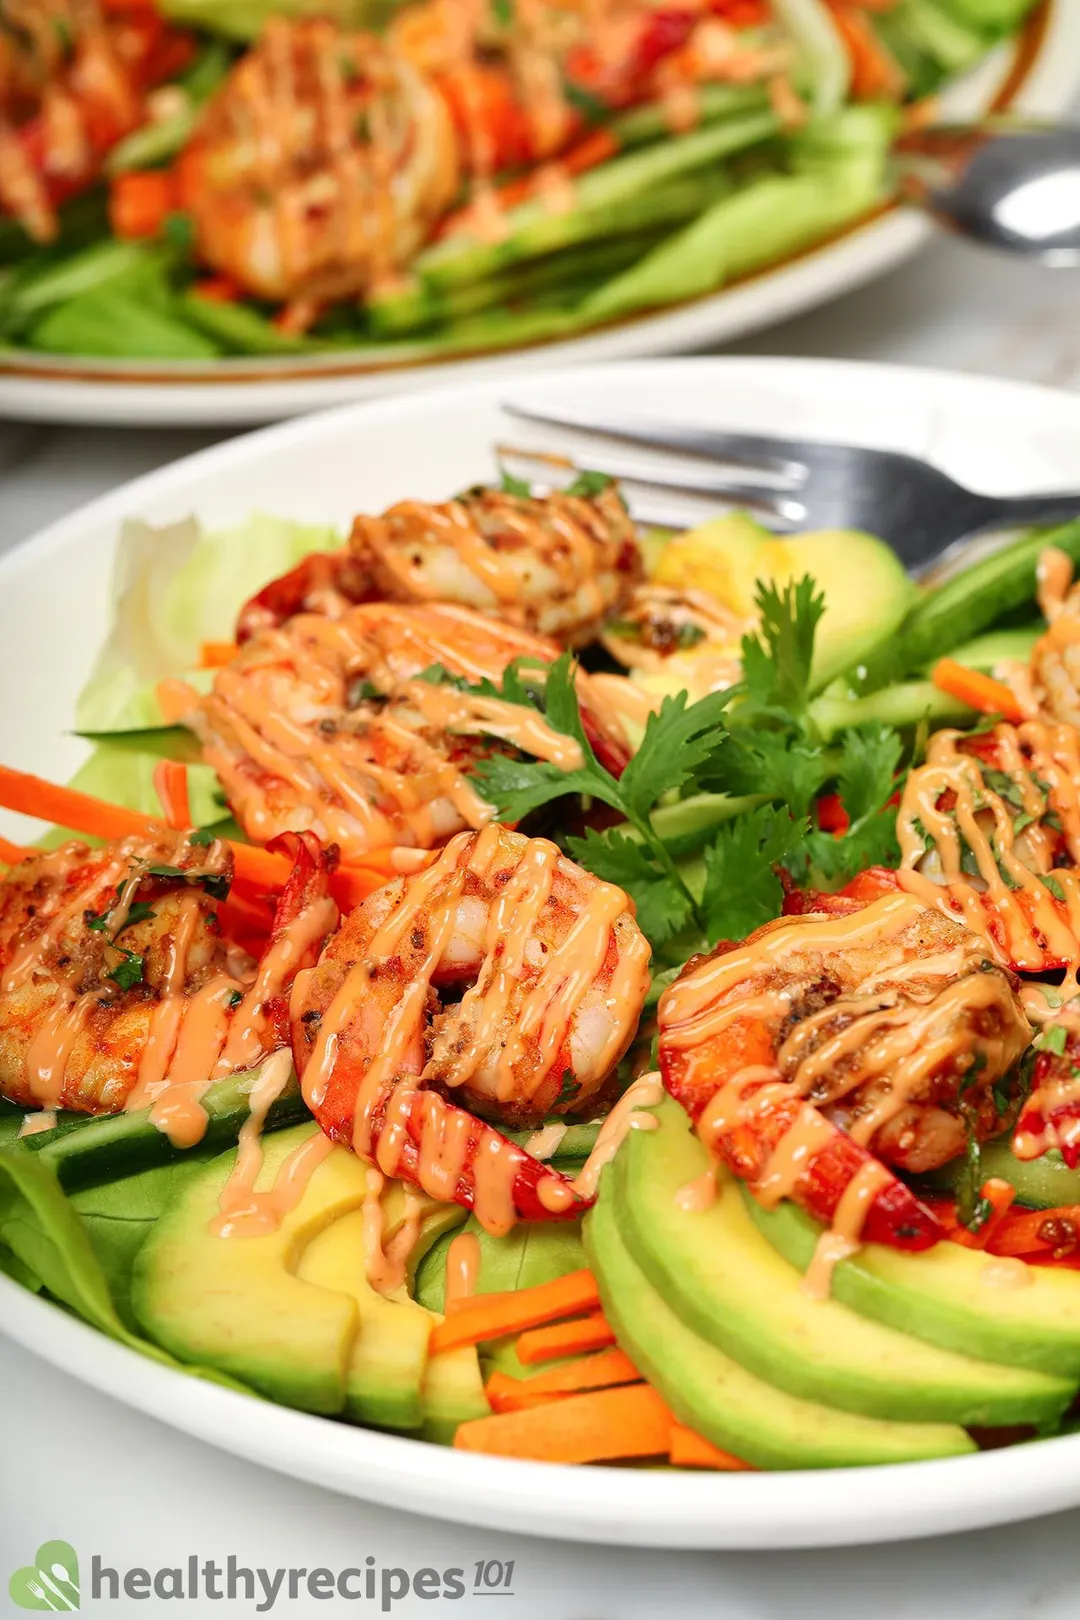 What to Serve with Shrimp Lettuce Wraps